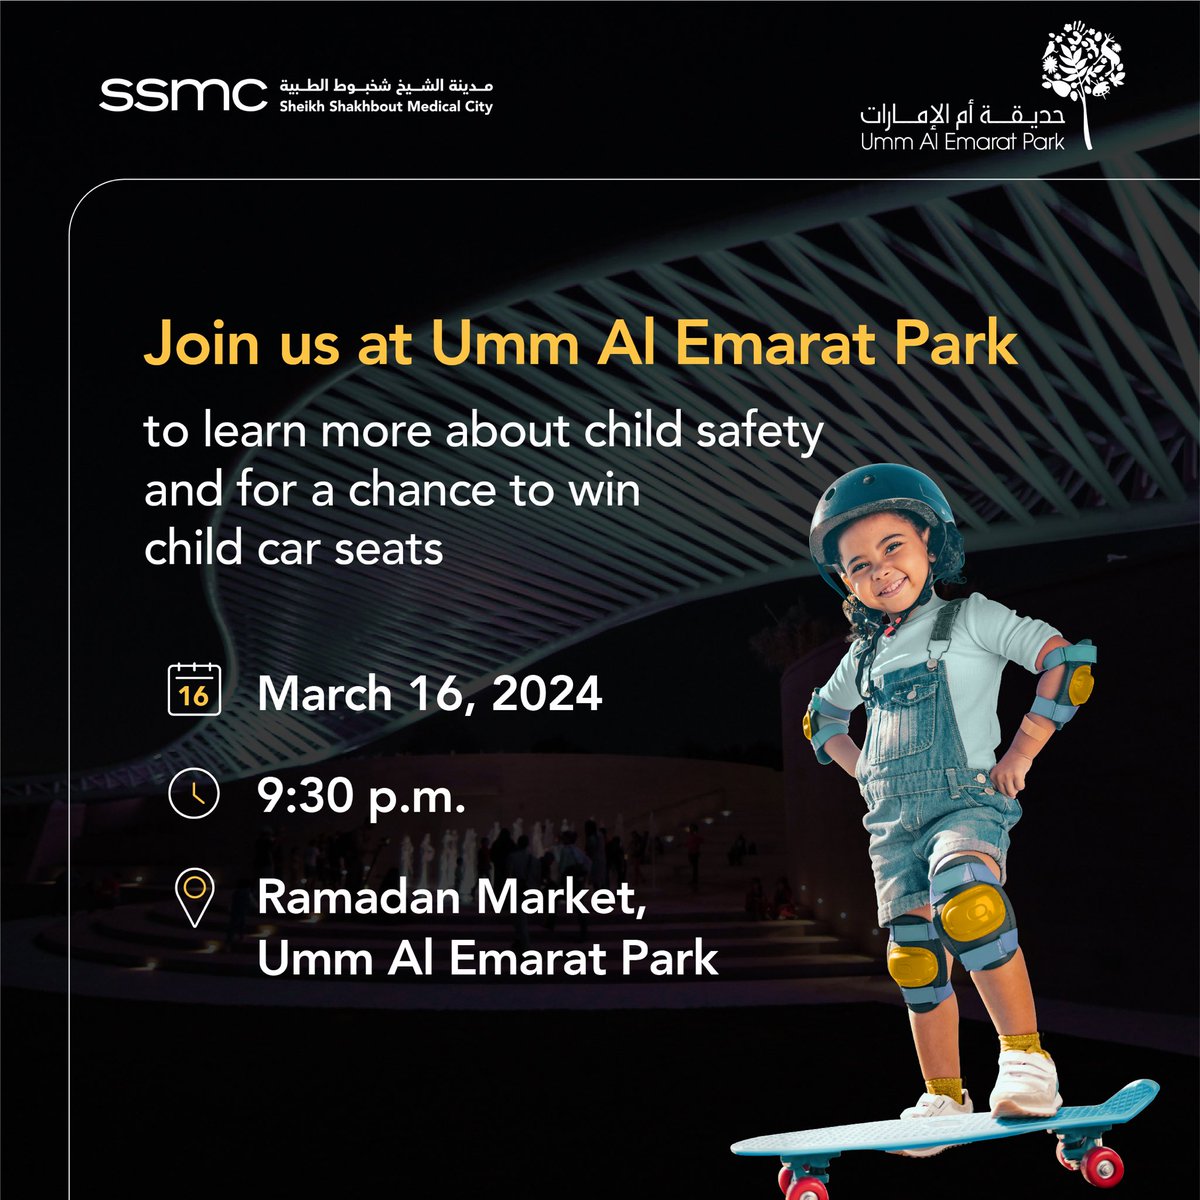 Join us on Saturday, March 16, at 9:30 p.m., at Umm Al Emarat Park's Ramadan Market for an insightful session on child safety with Dr. Anas Alshorman, specialist neonatologist, SSMC, and stand a chance to win child car seats!

#SSMCAbuDhabi #AWorldOfExpertsForYou #SSMC